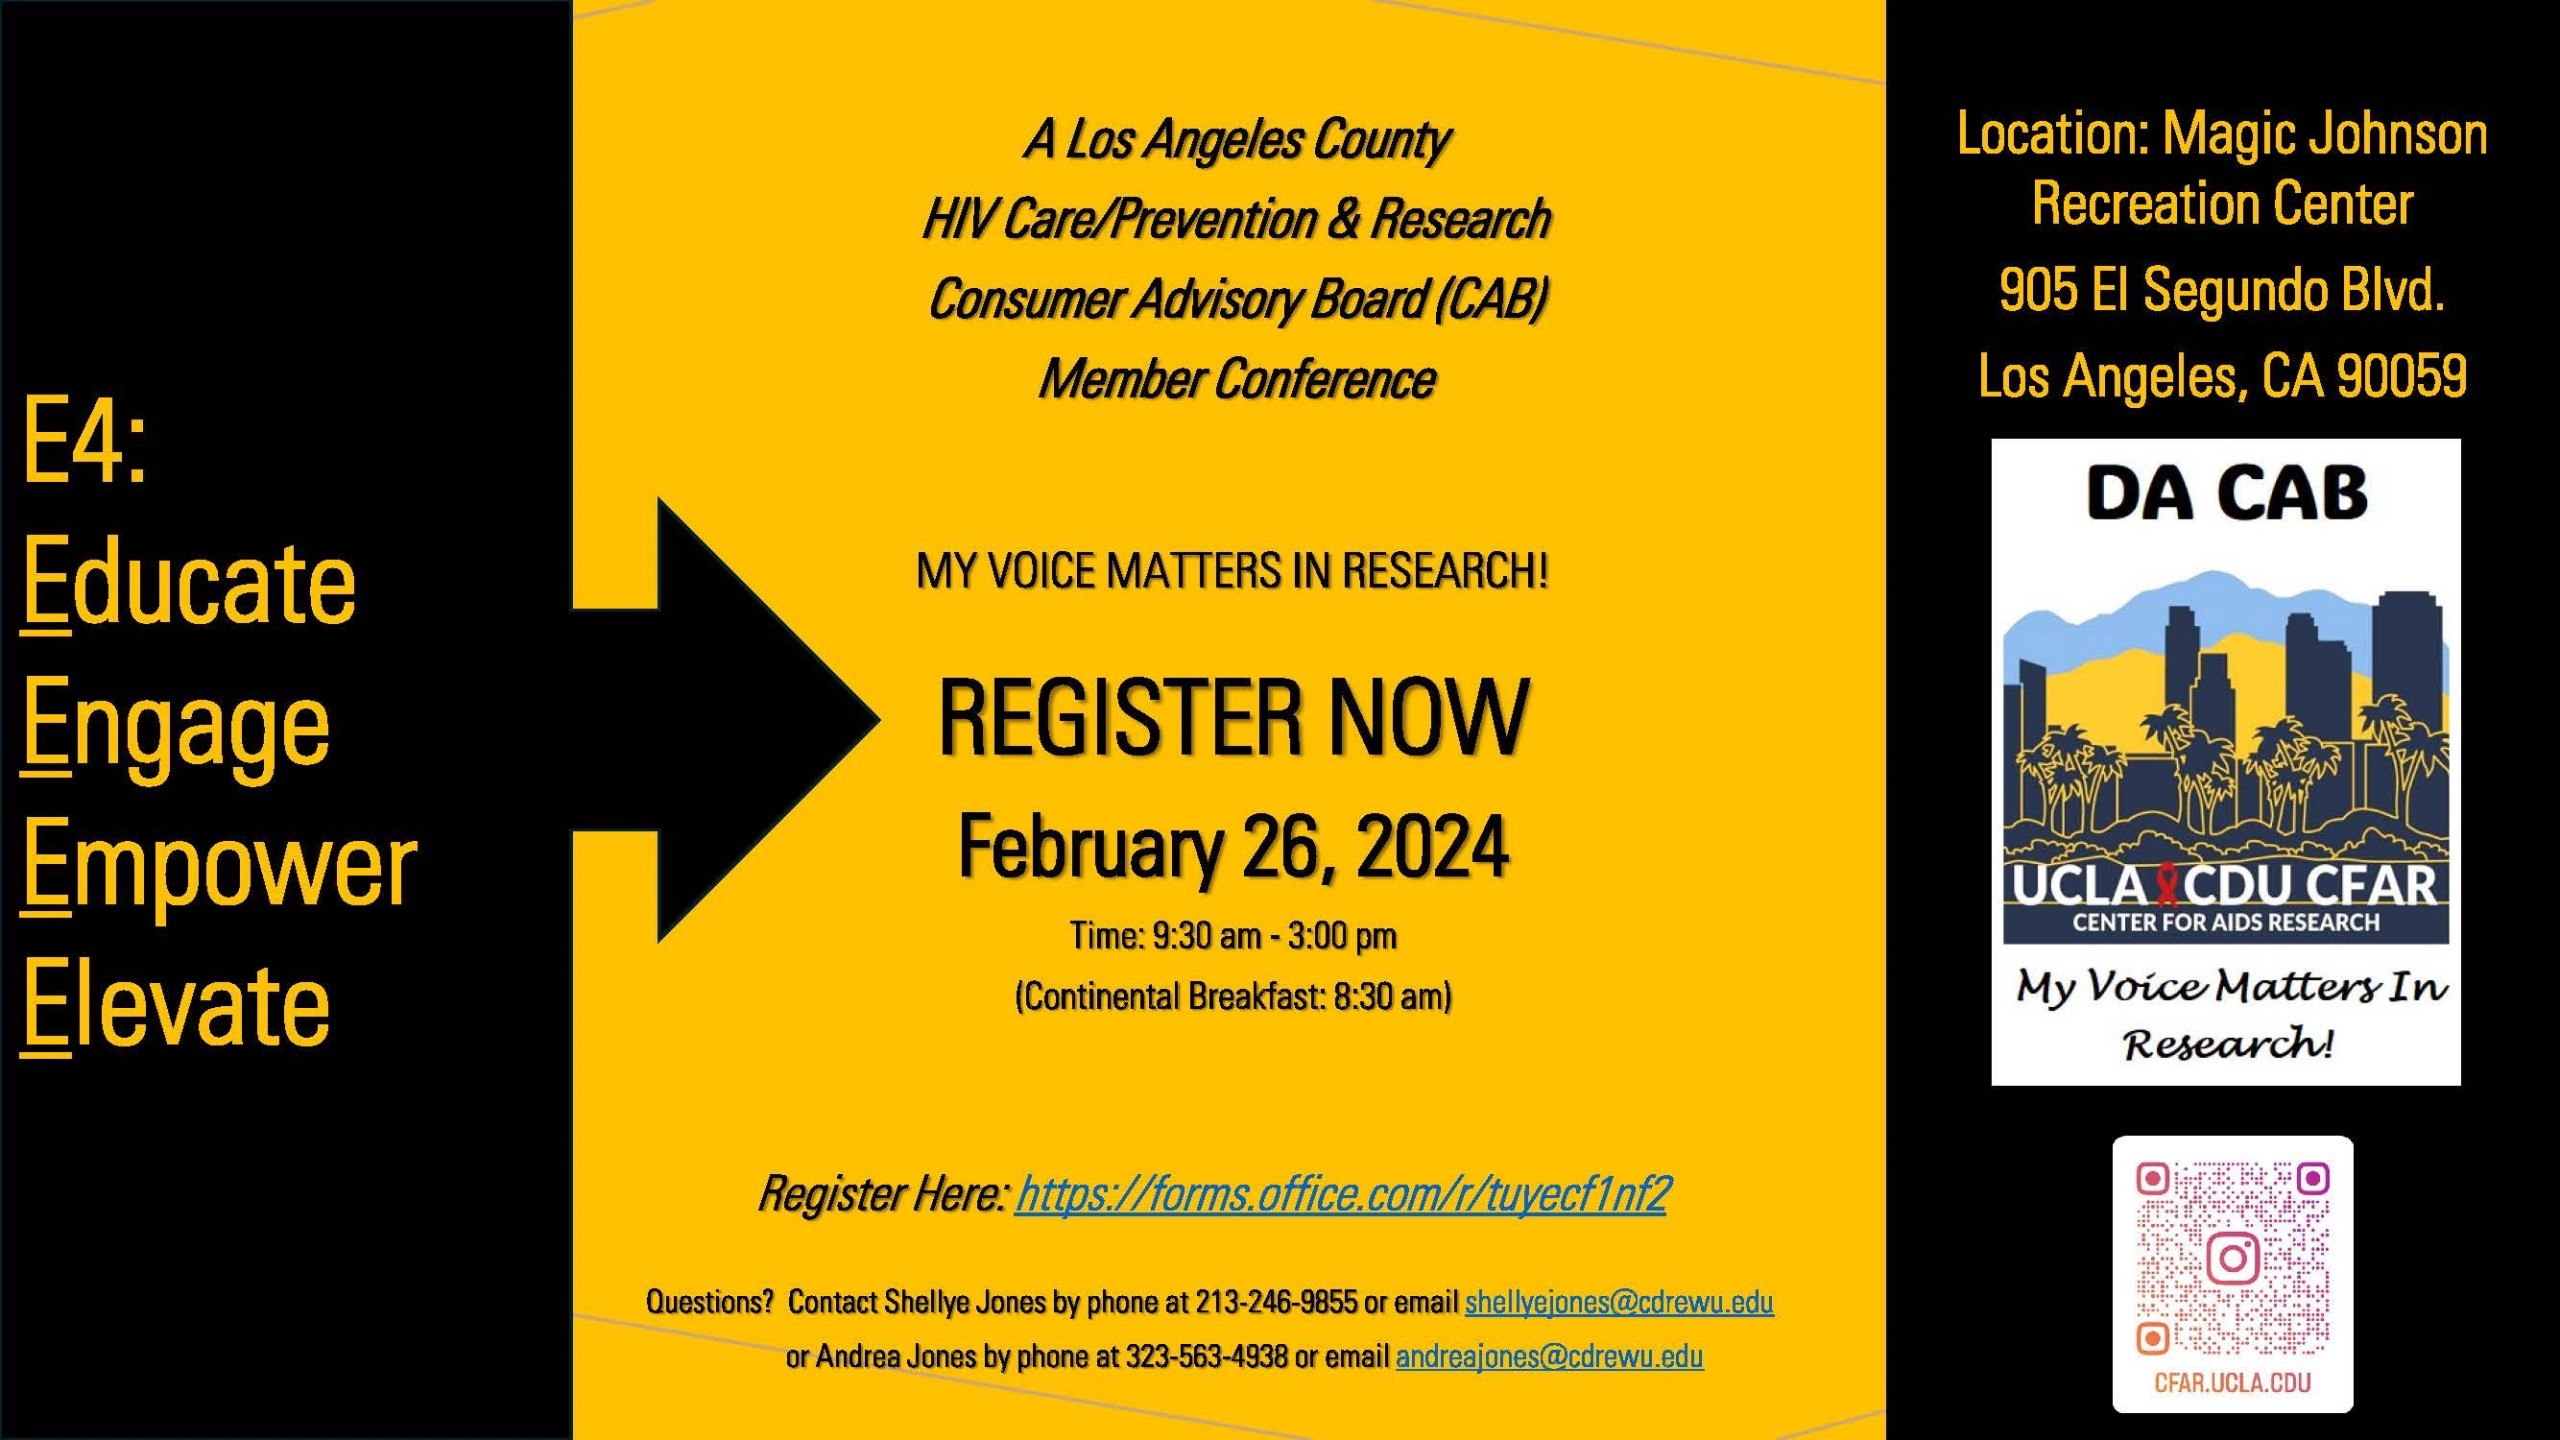 Register Now! Los Angeles County HIV/Care Prevention & Research Community Advisory Board Member Conference